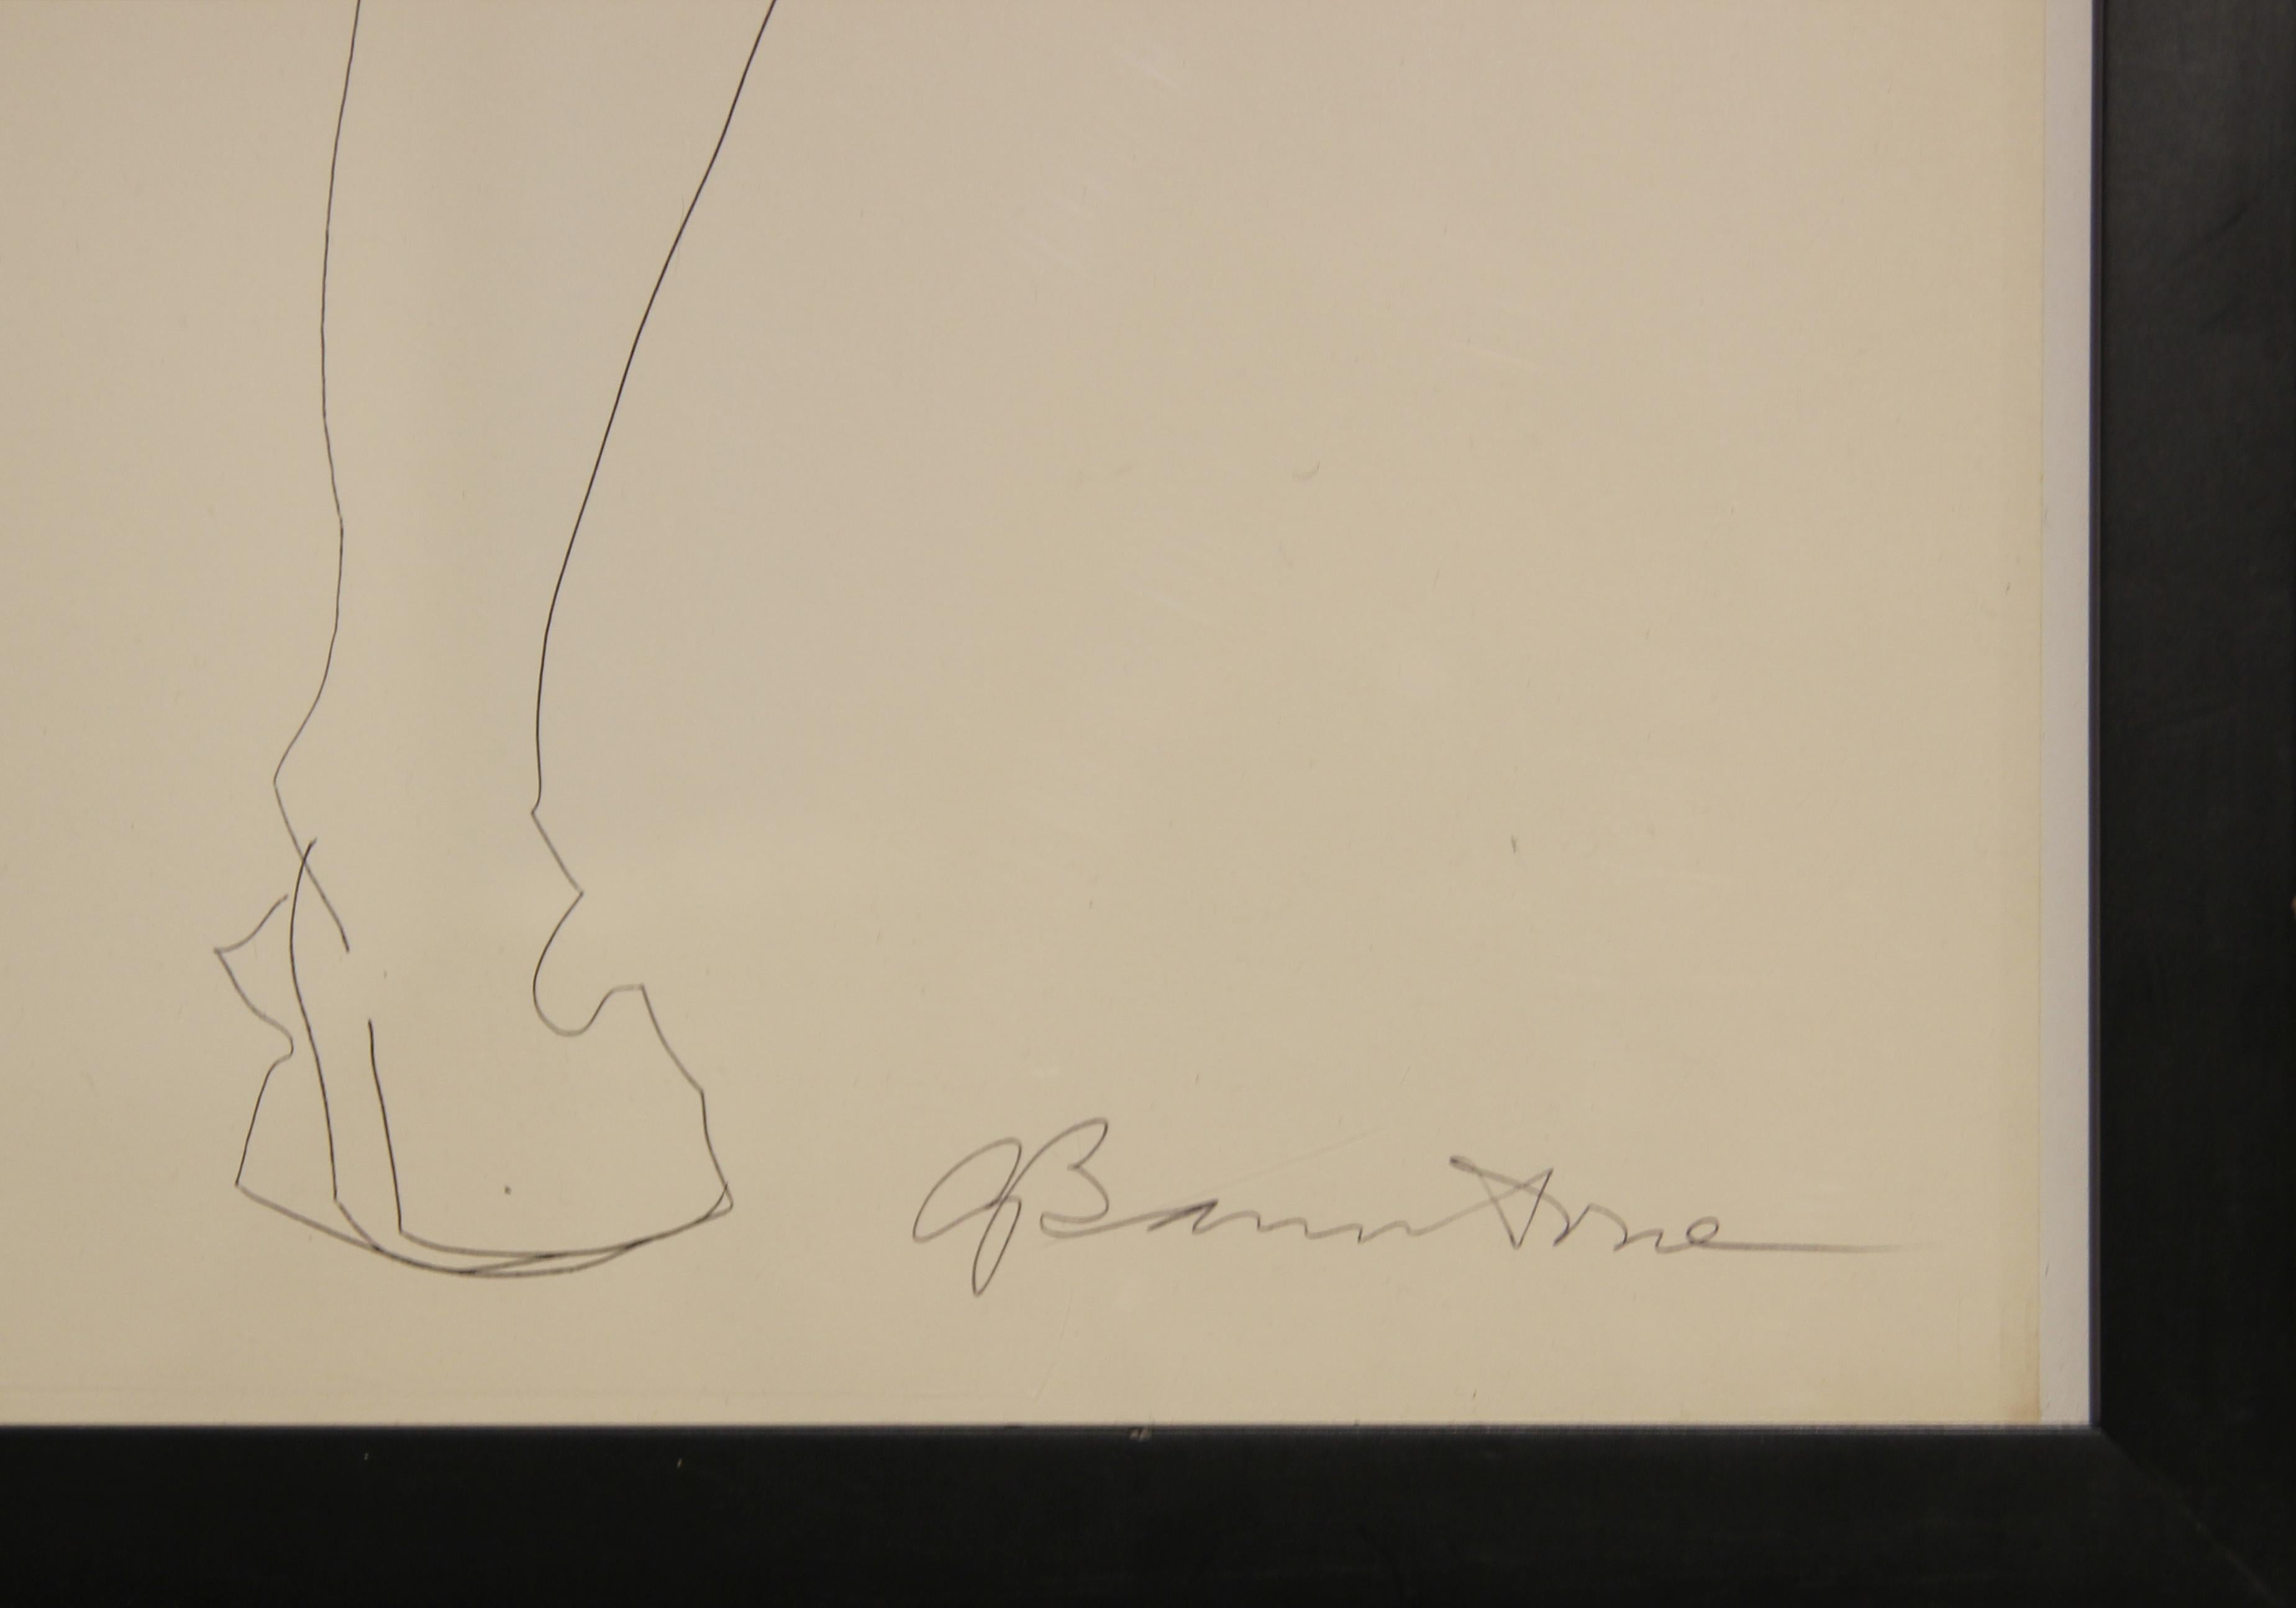 Abstract pencil drawing of a nude male with his back turned and leg raised. The piece is displayed in a black frame and is signed by the artist in the bottom right corner. 

Dimensions Without Frame: H 23.5 in. x W 19 in. 

Artist Biography: